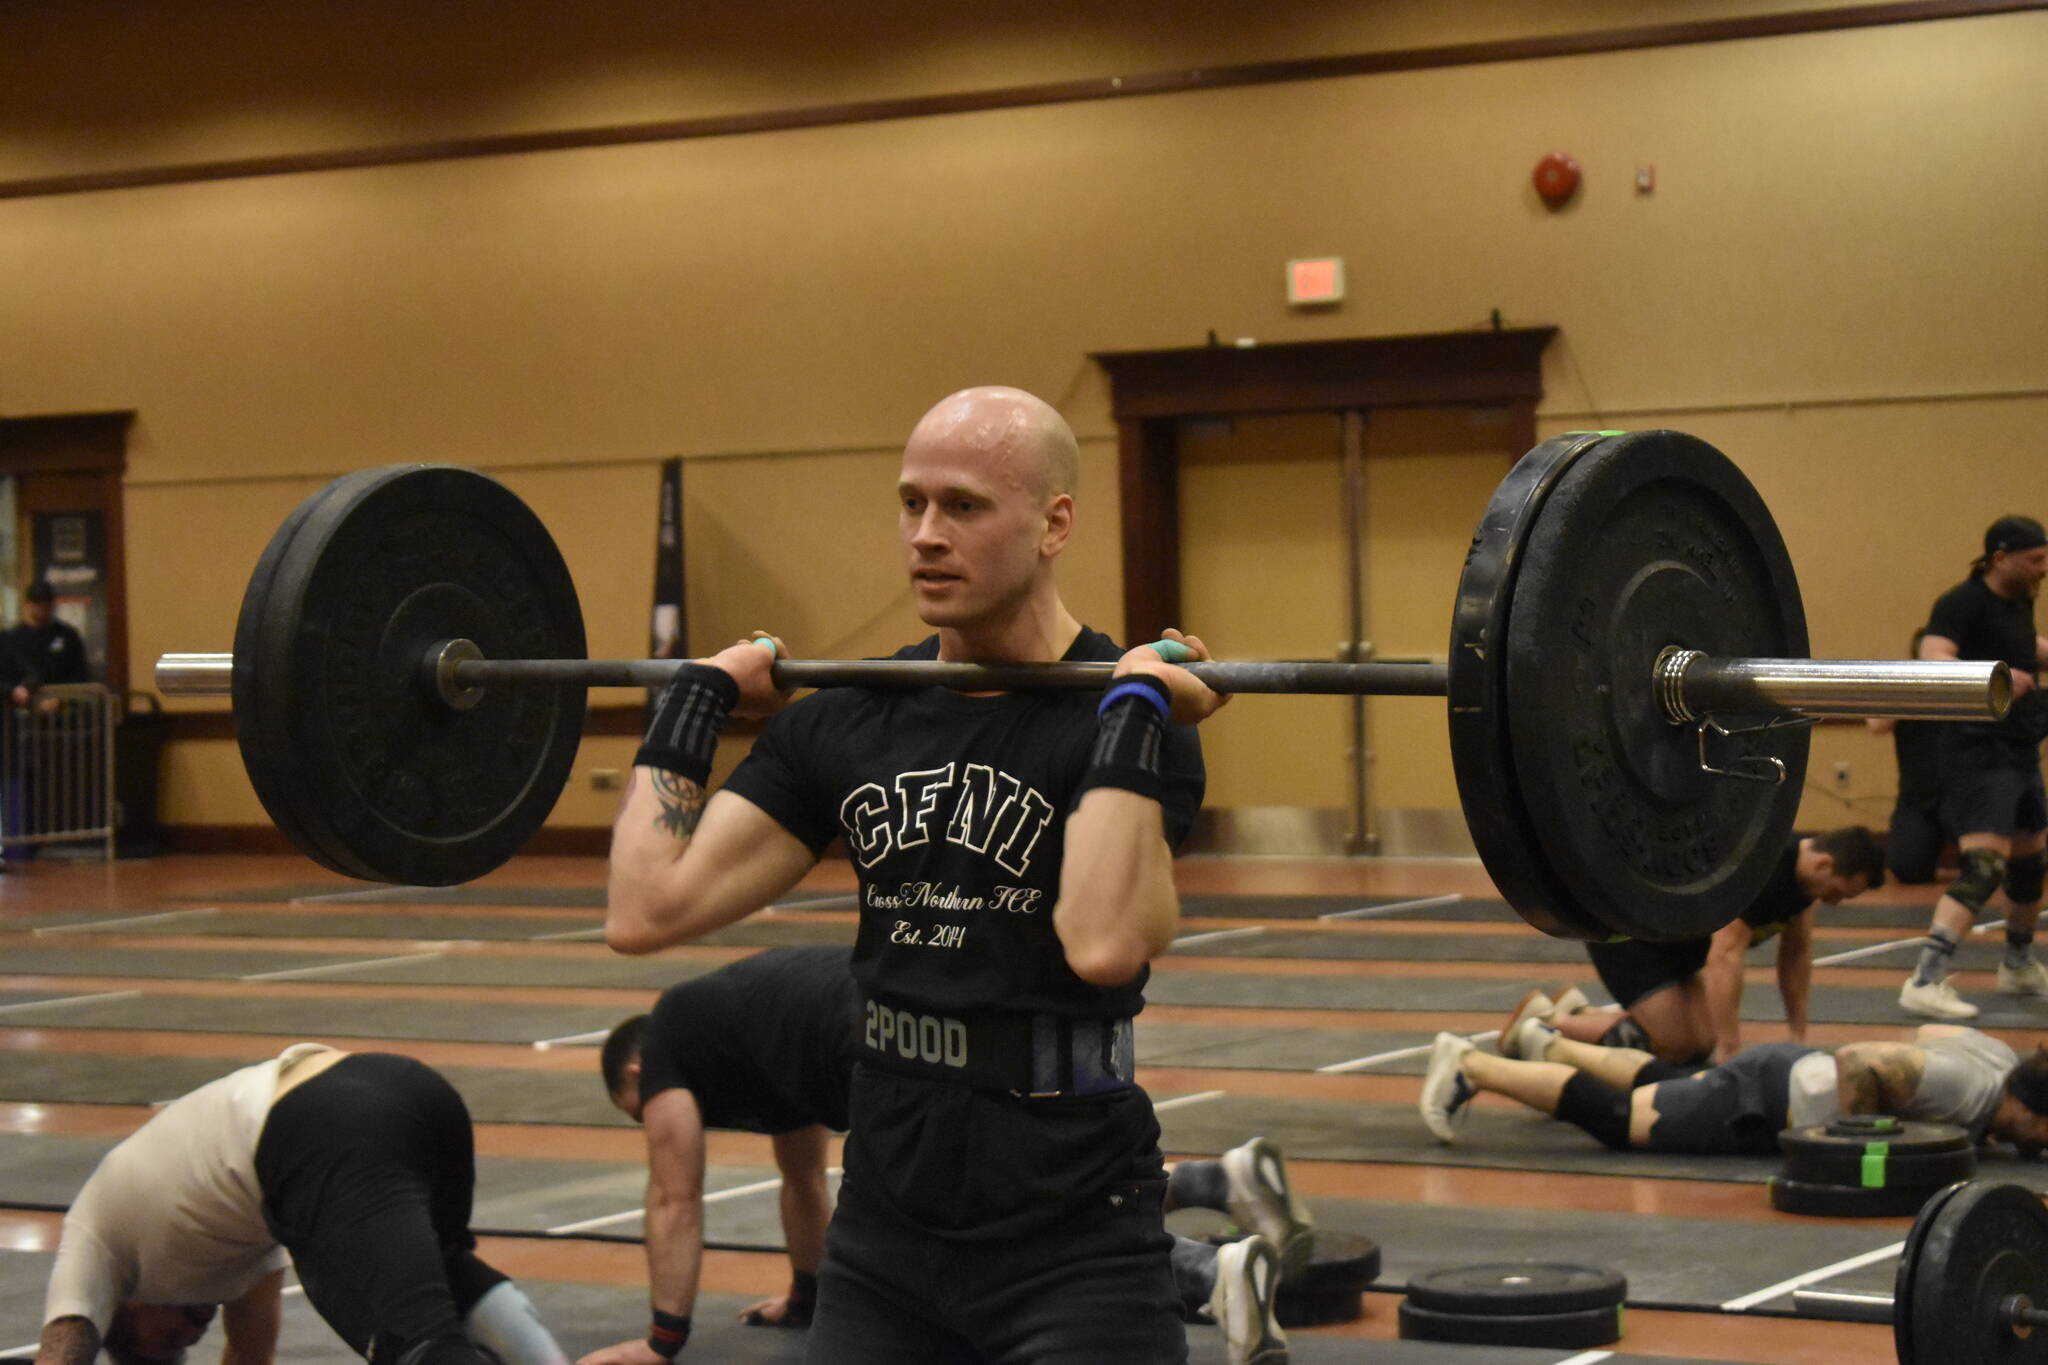 The Okanagan Valley Throwdown returned to Penticton Trade and Convention Centre on Saturday, March 18, welcoming cross-fit competitors from across Western Canada. (Logan Lockhart- Western News)